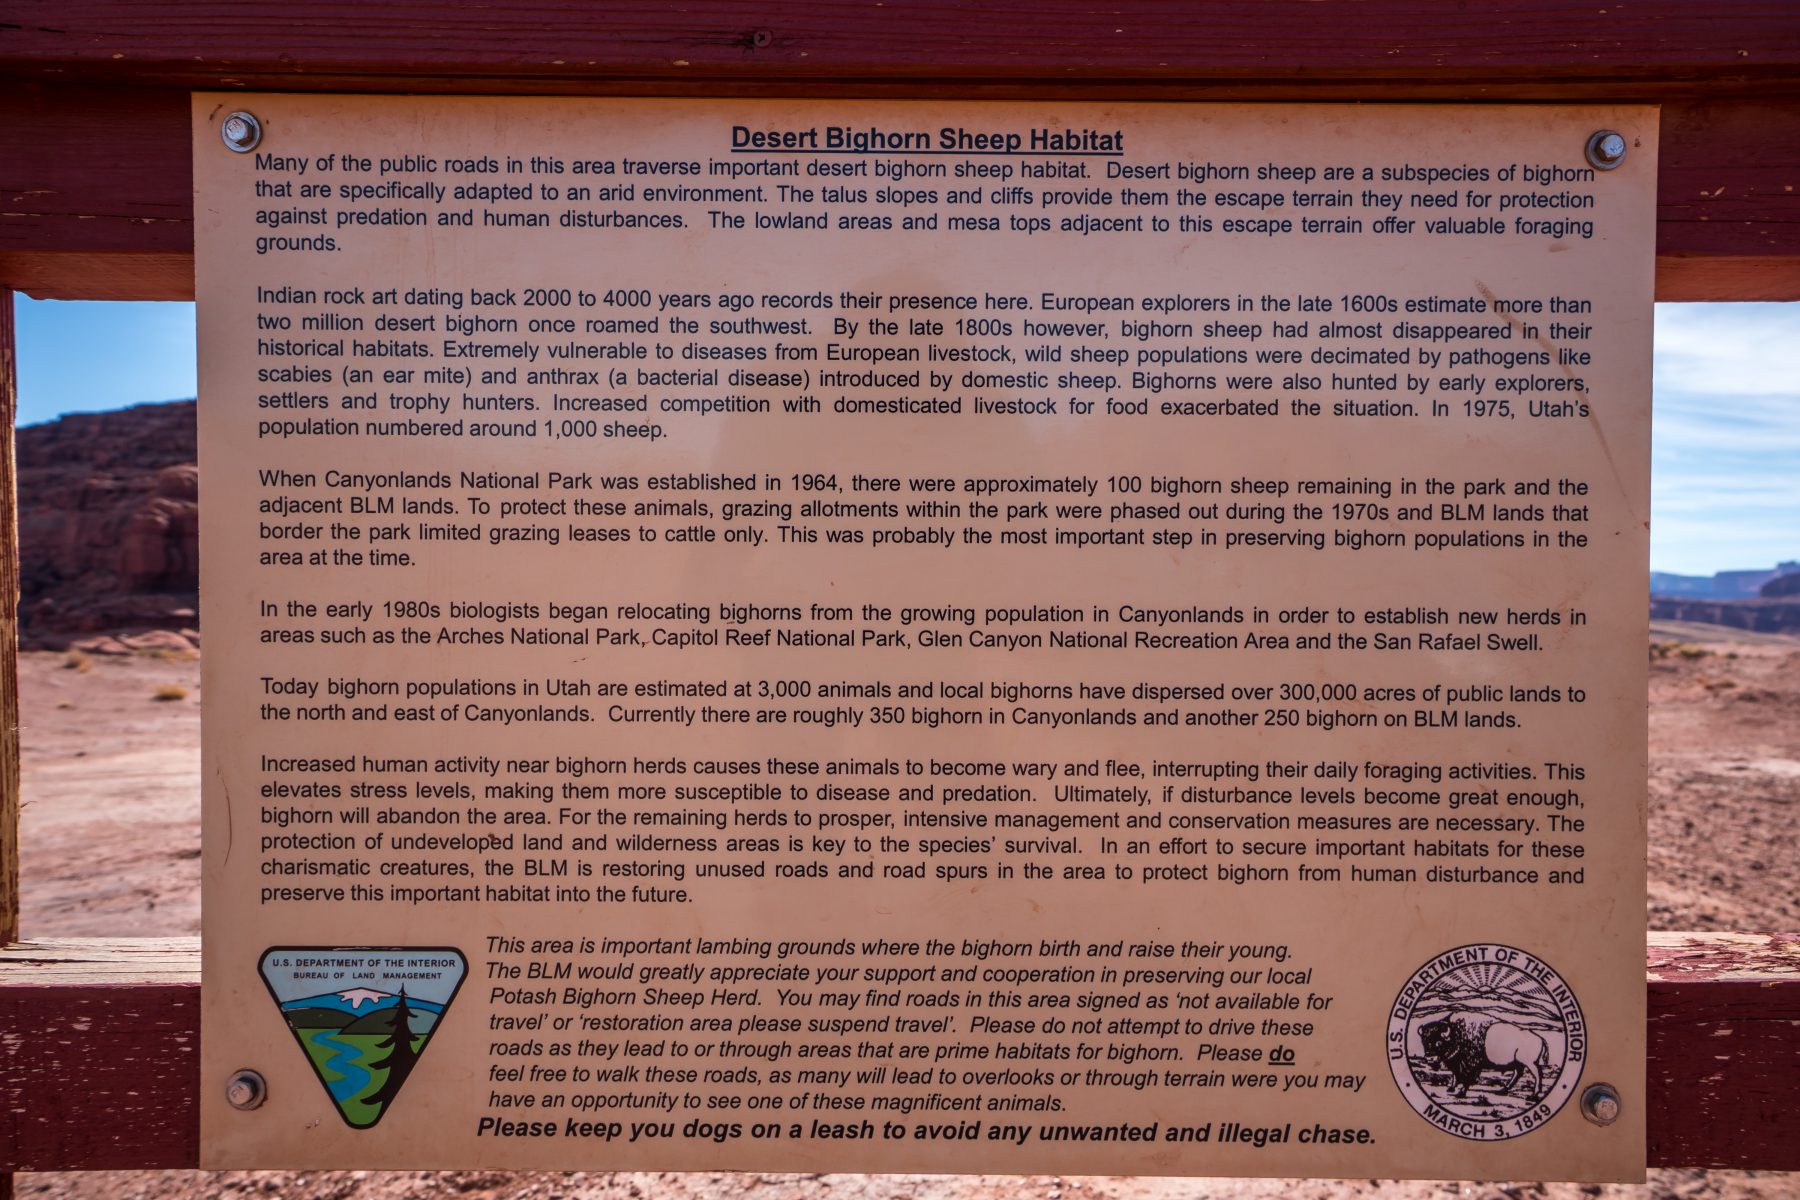 The very informative sign on the Shafer Trail about Desert Bighorn Sheep.